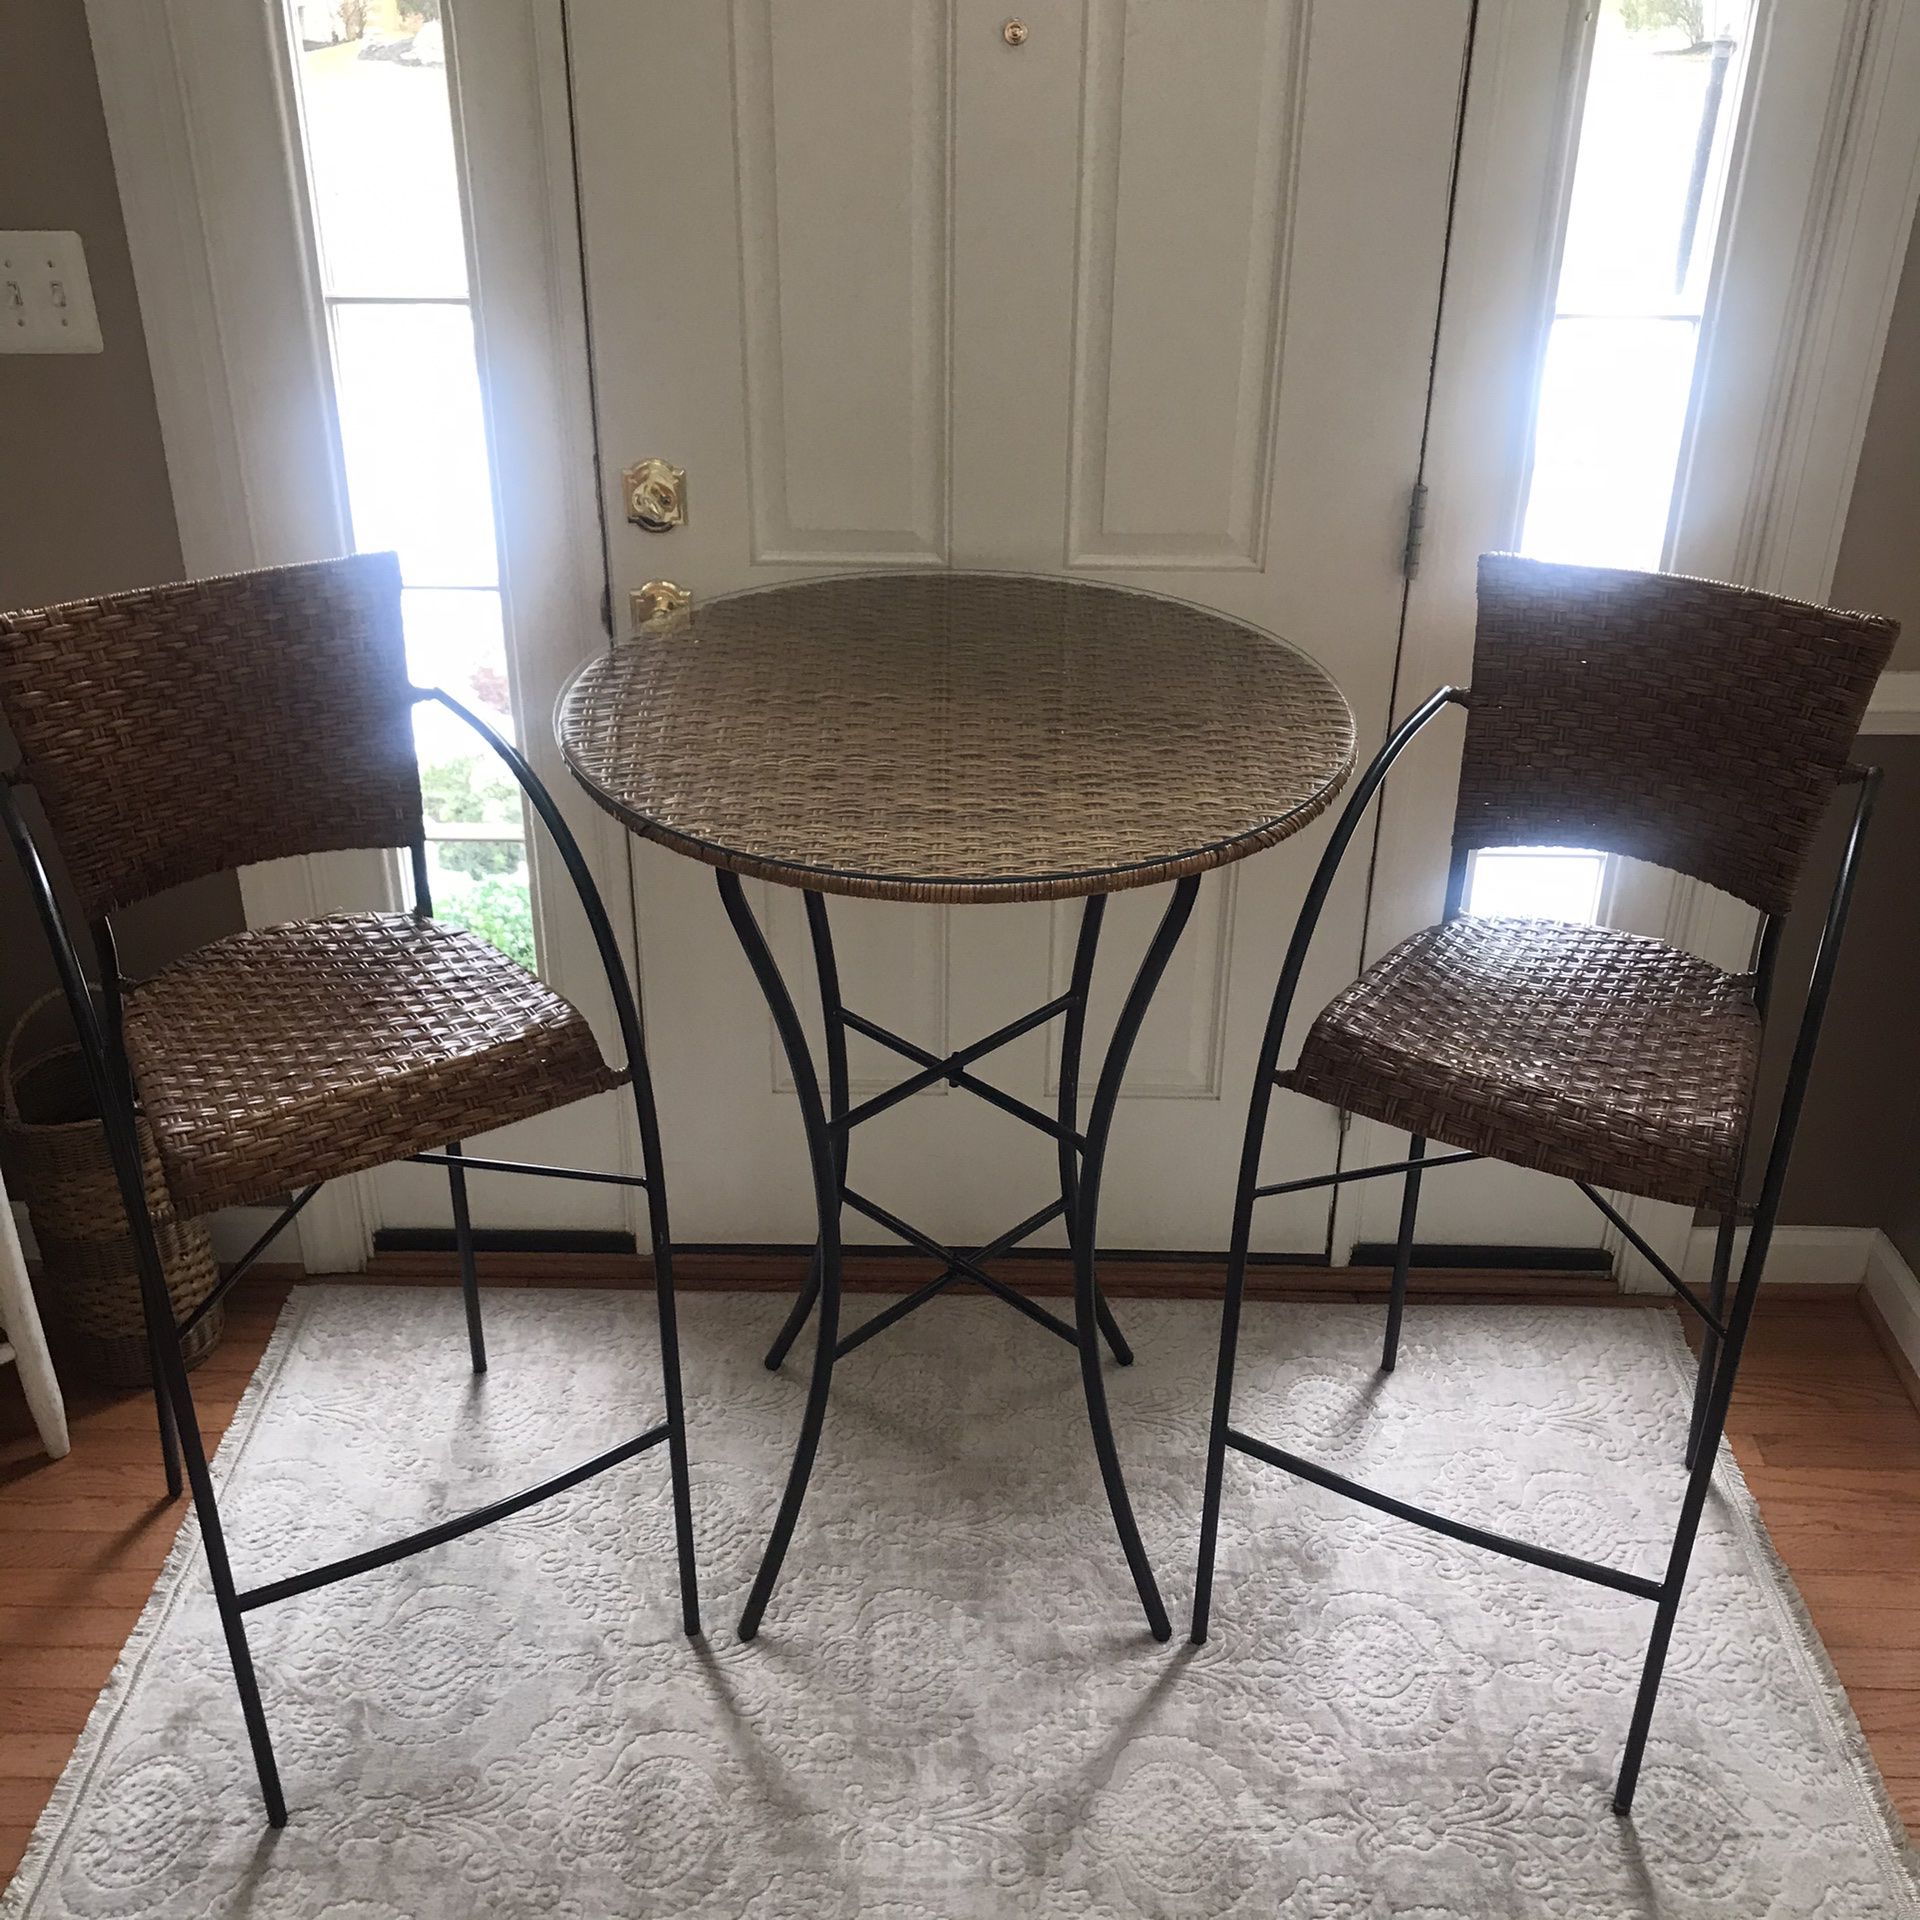 Pier 1 Bistro Table & Two Chairs